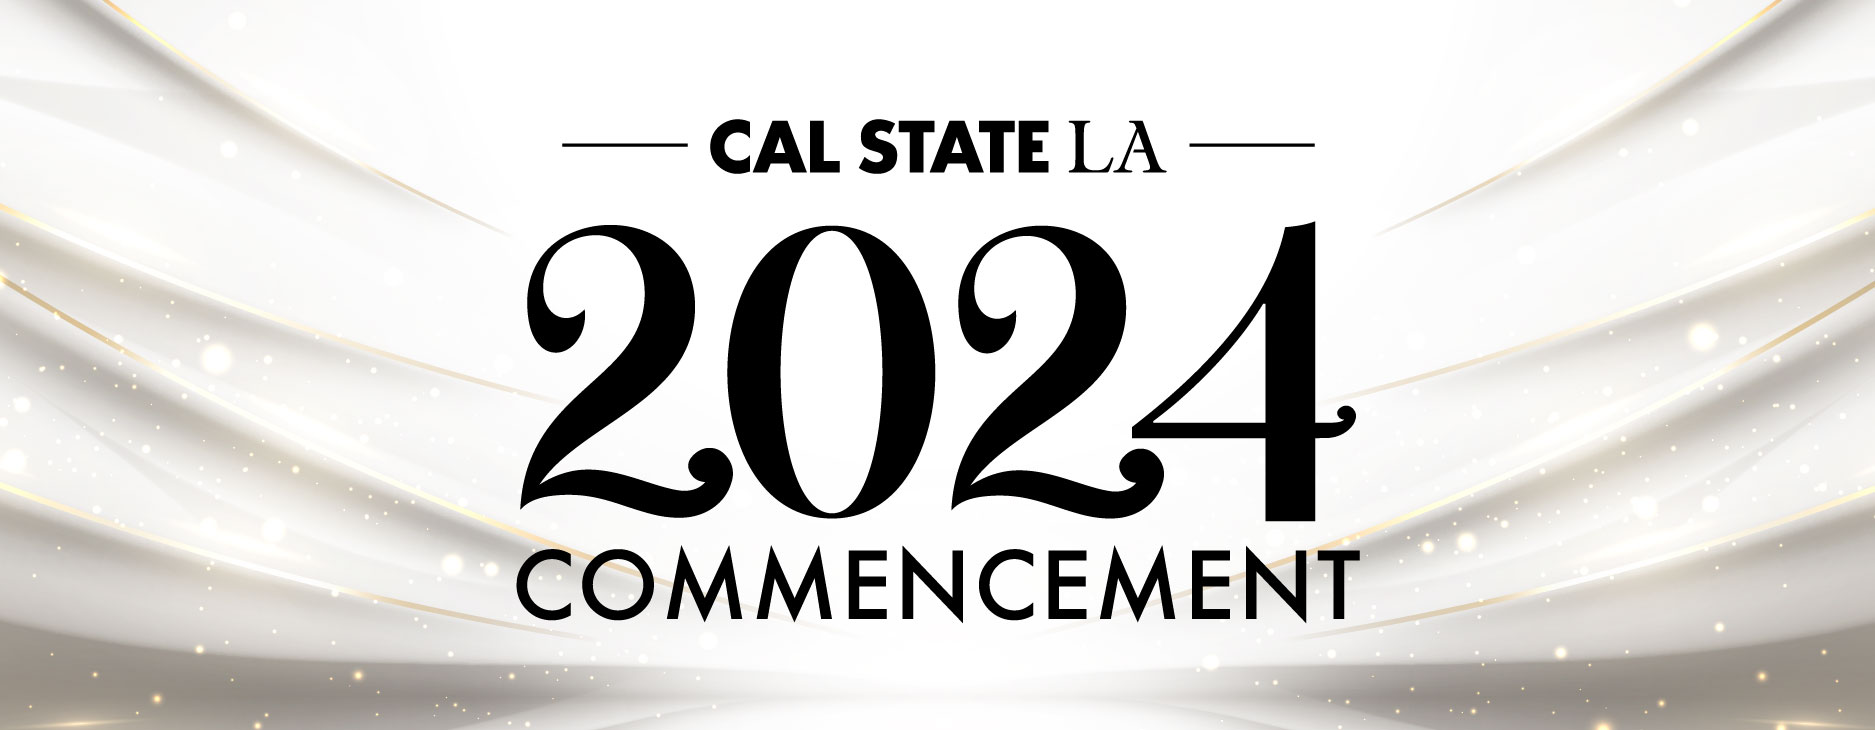 Cal State LA Commencement 2024 Banner